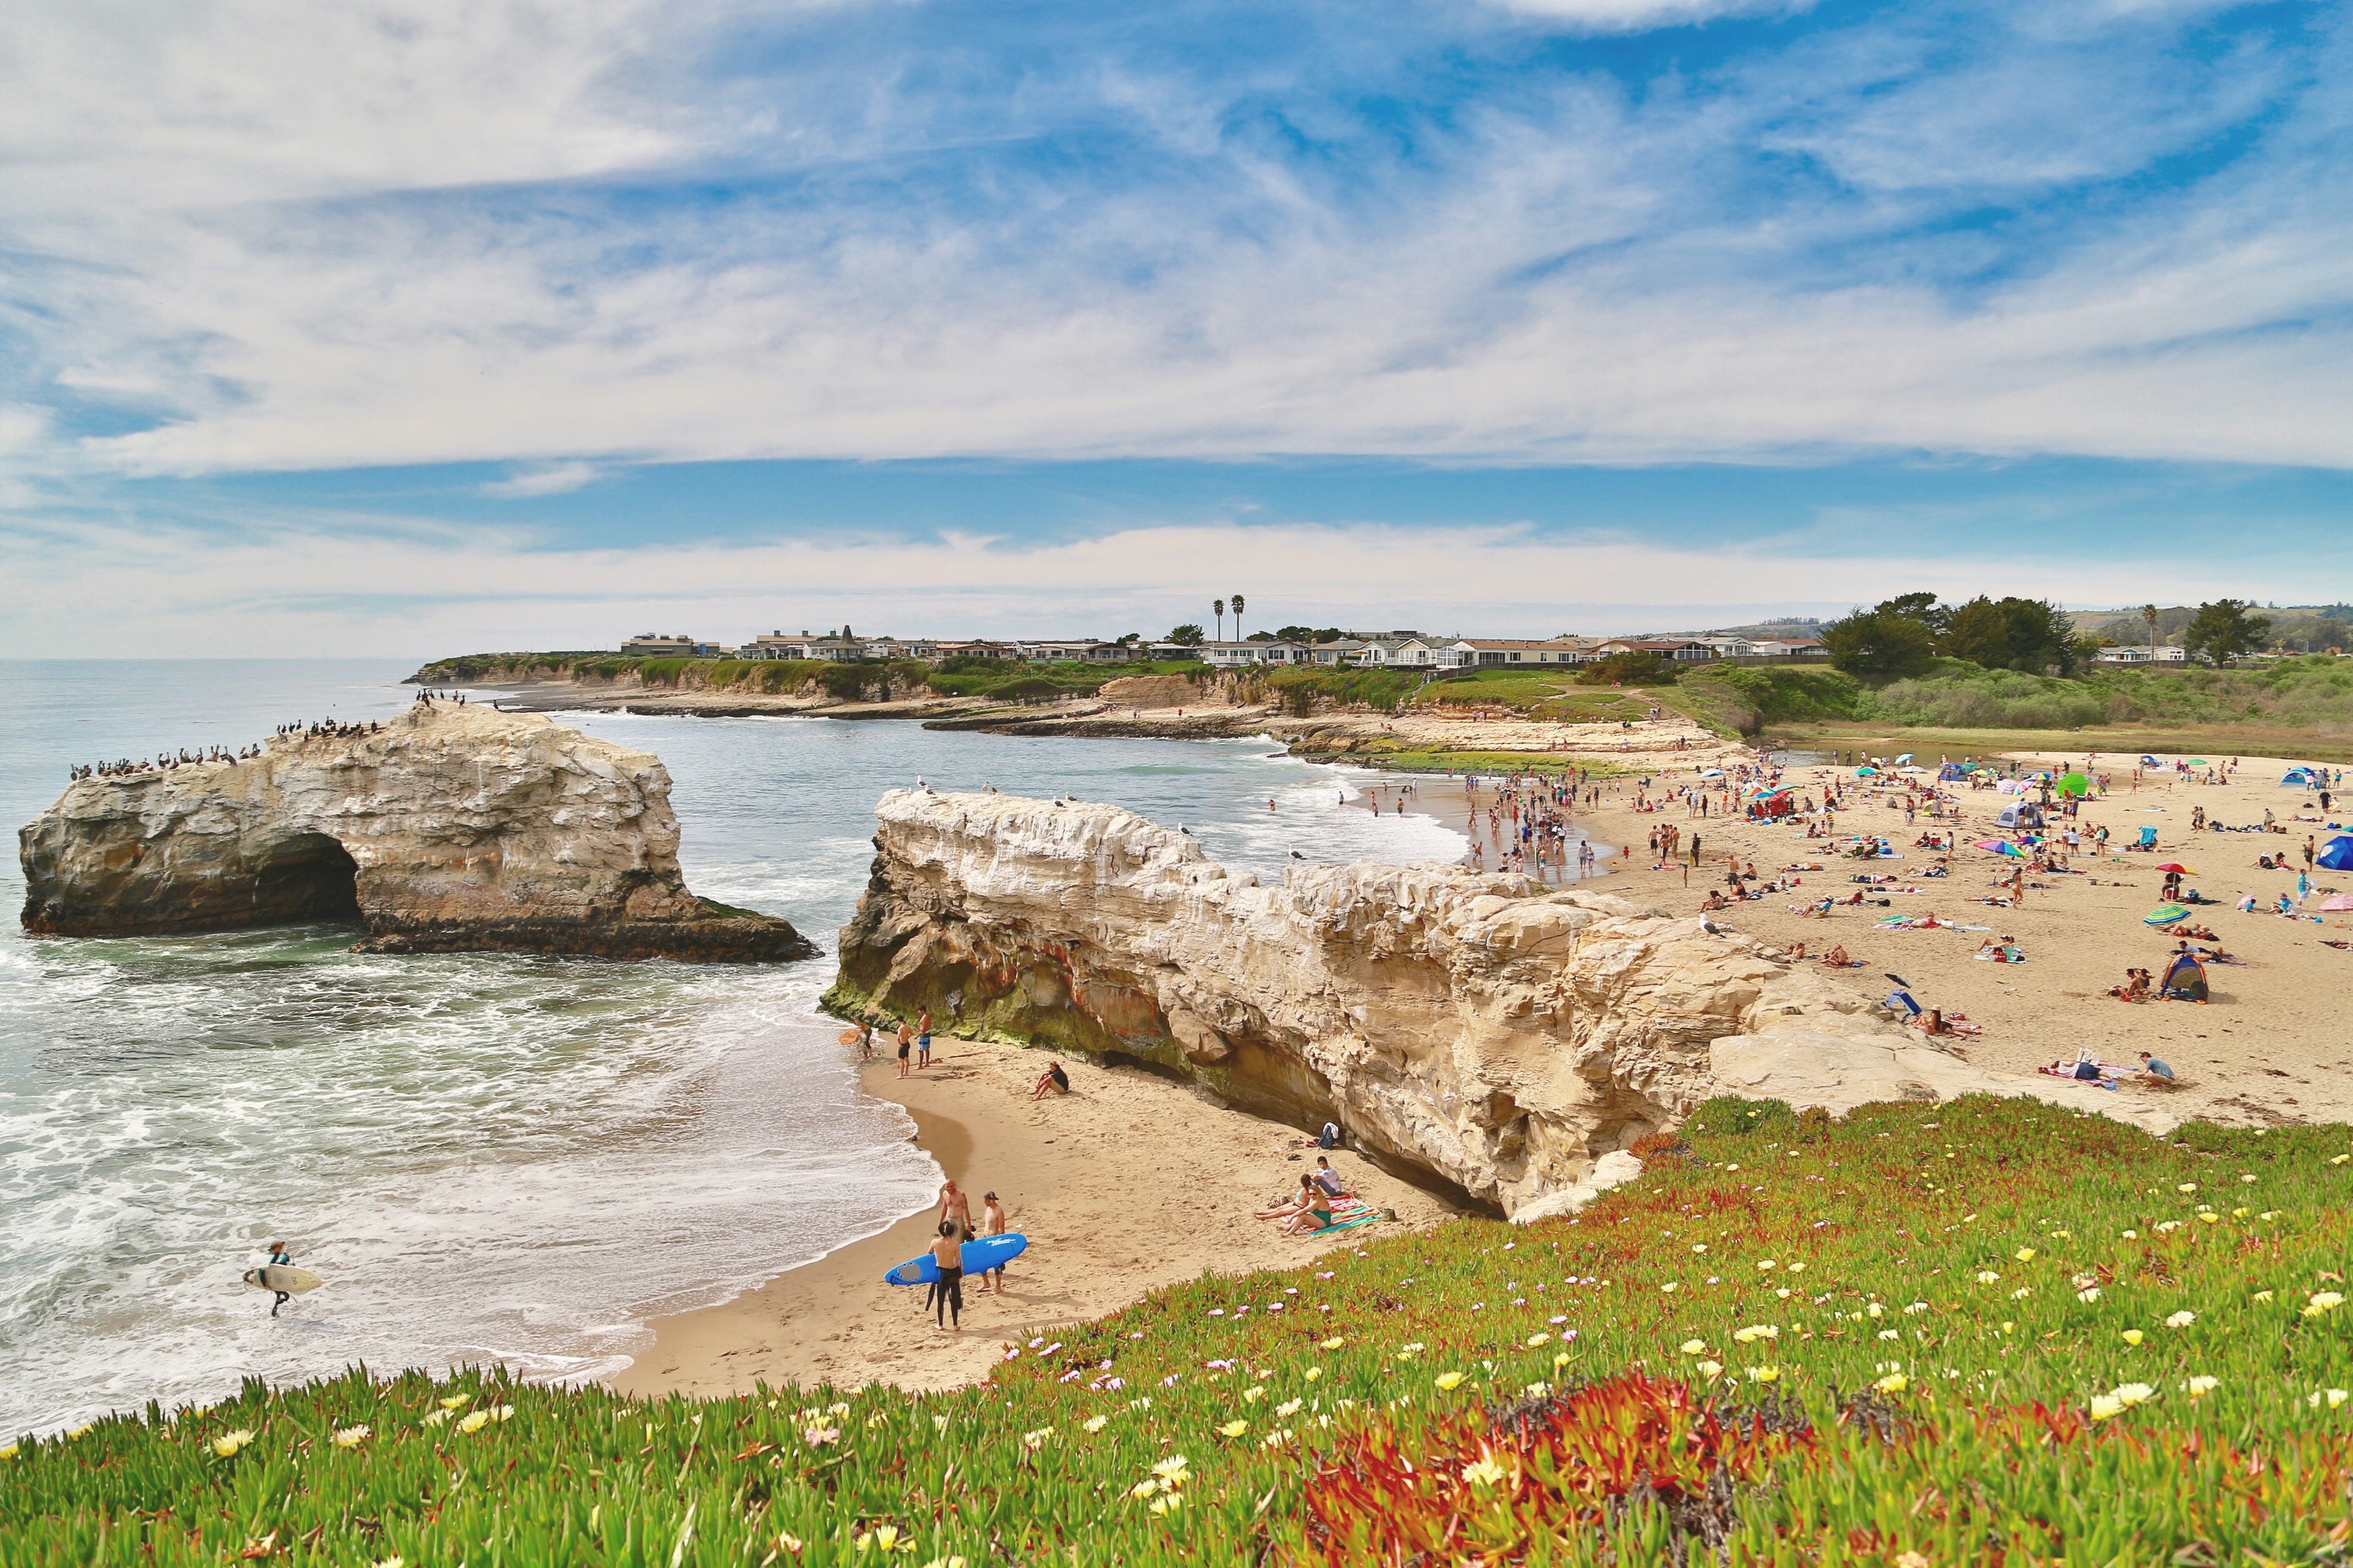 Sunbathers and surfers on a large beach with rocky outcrops in Santa Cruz, California 